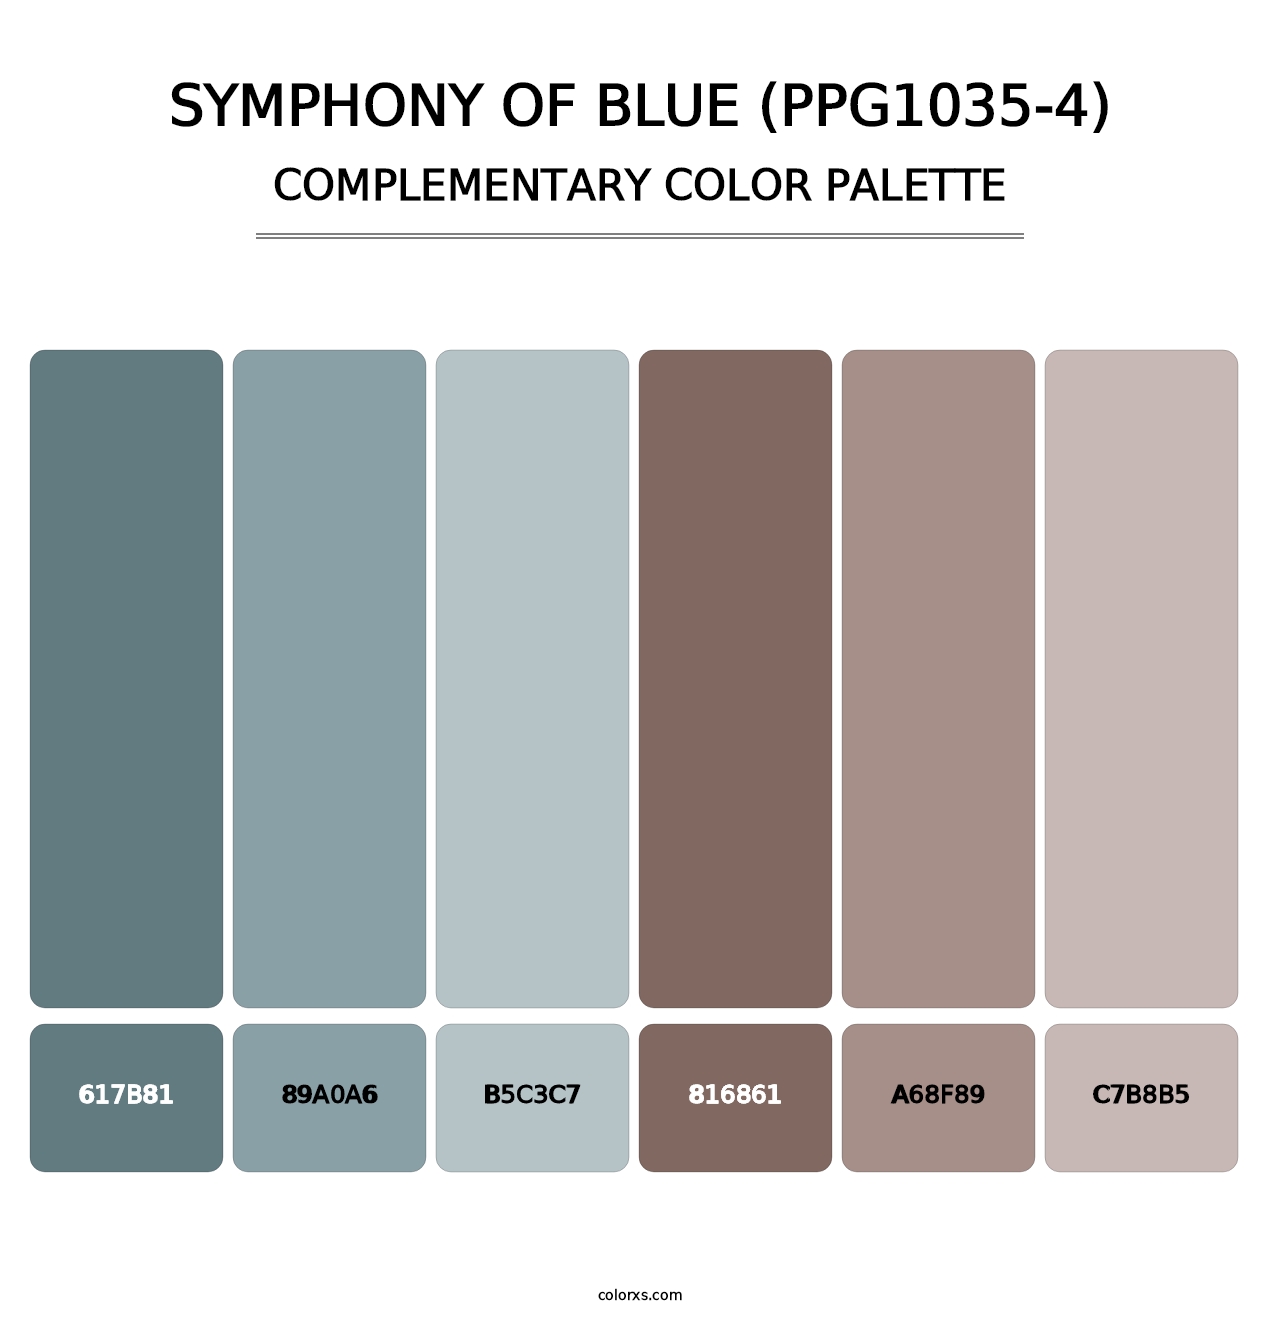 Symphony Of Blue (PPG1035-4) - Complementary Color Palette